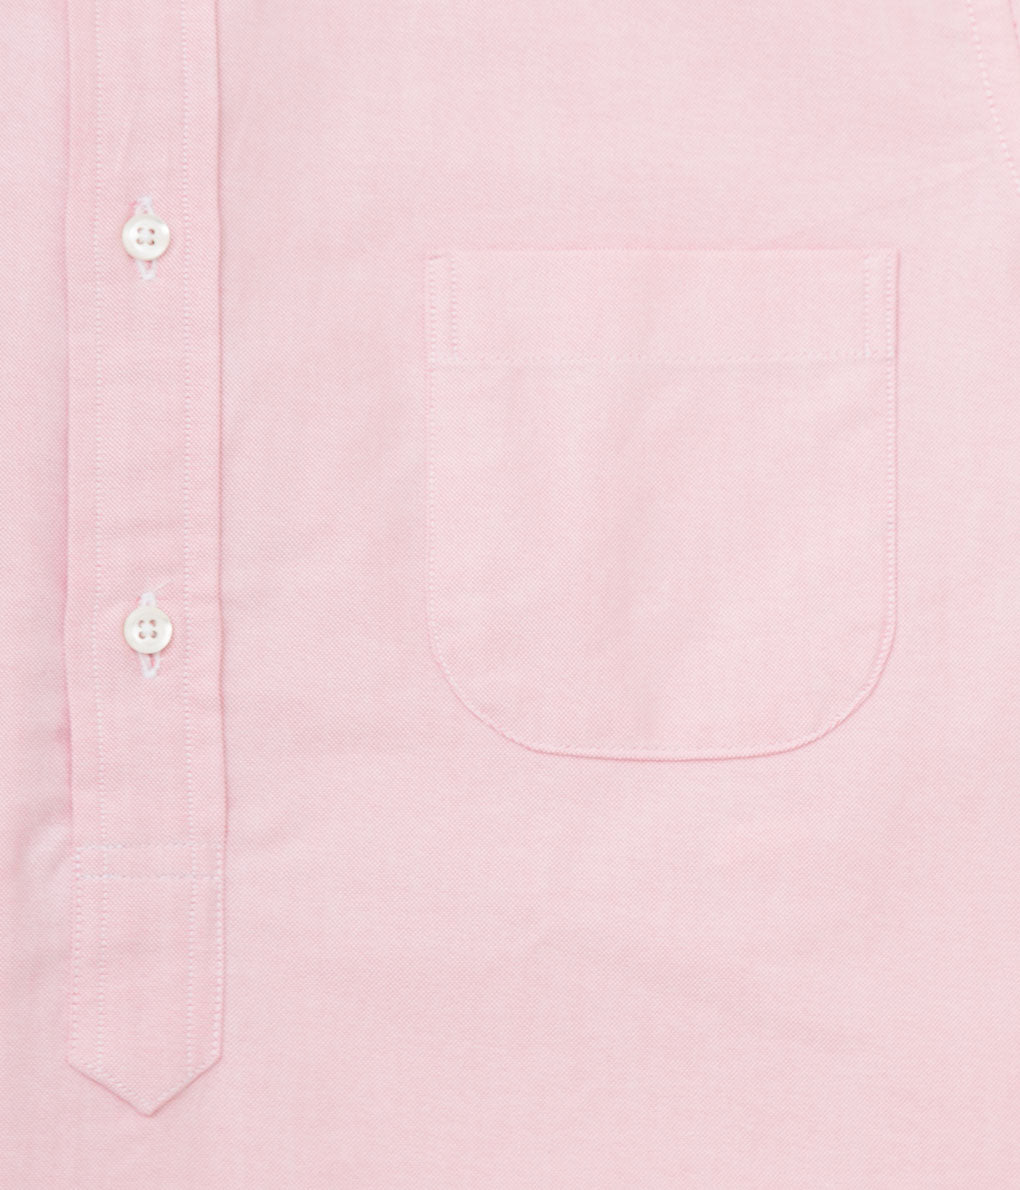 INDIVIDUALIZED SHIRTS "CAMBRIDGE OXFORD (NEW STANDARD FIT POP OVER SHORT SLEEVE SHIRT)" (PINK)